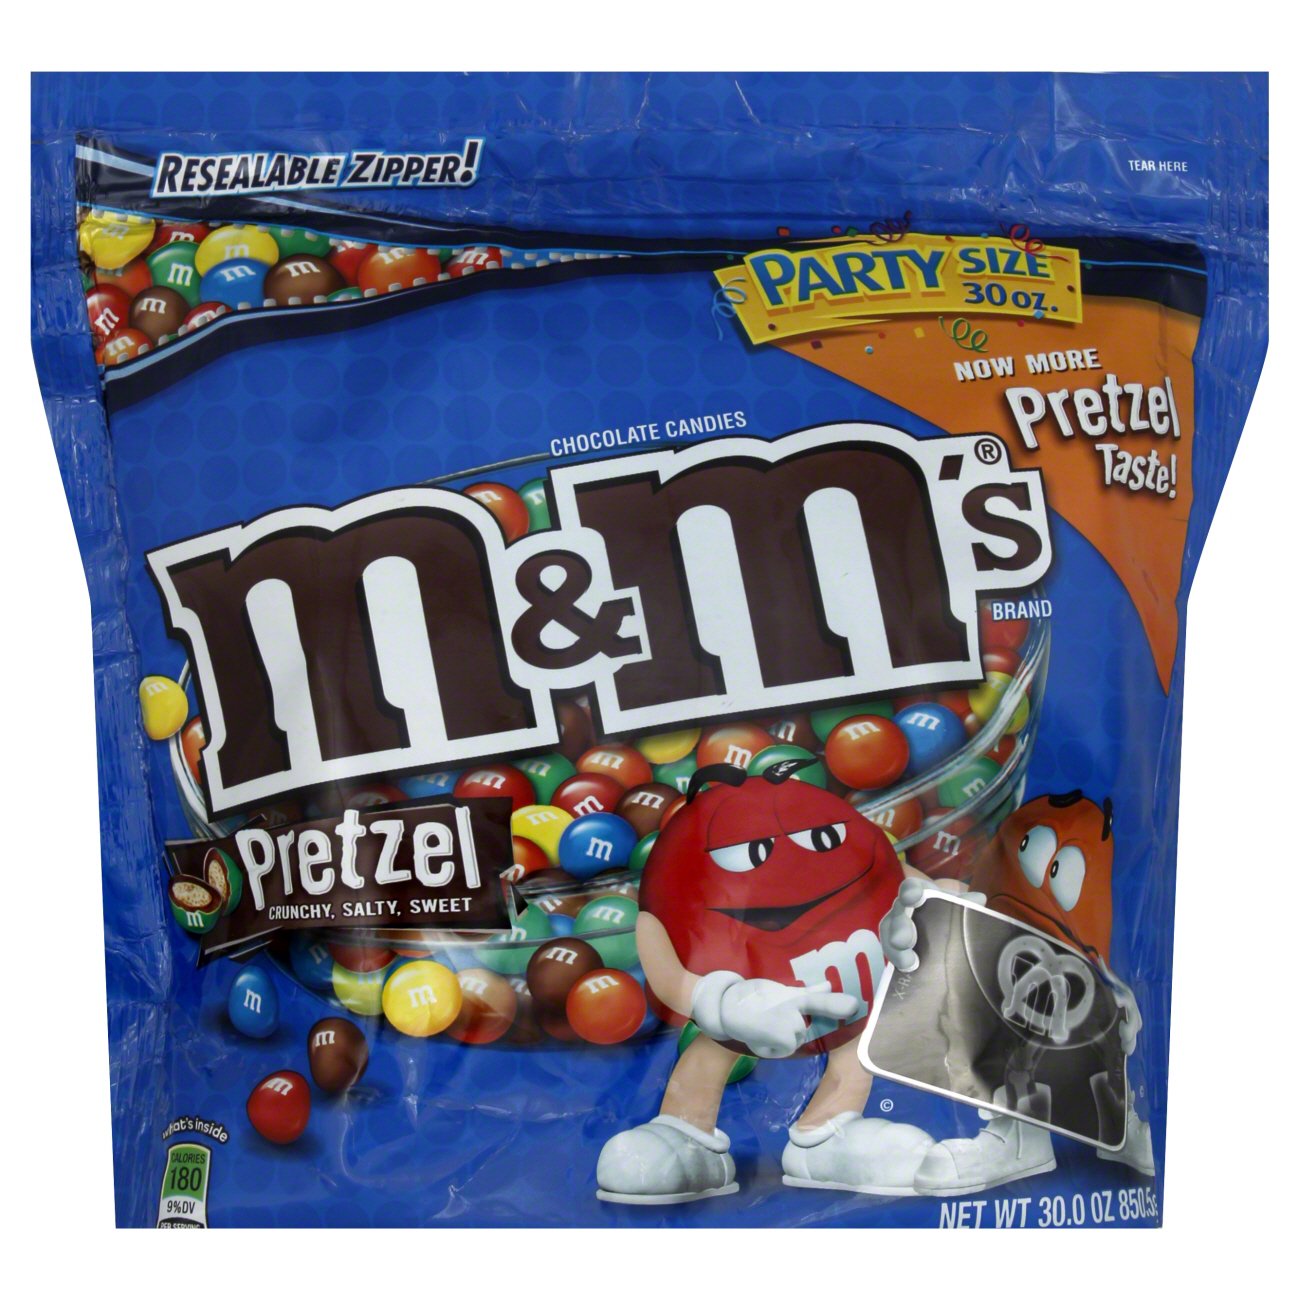 Calories in Chocolate Candies, Pretzel, Sharing Size from M&M's